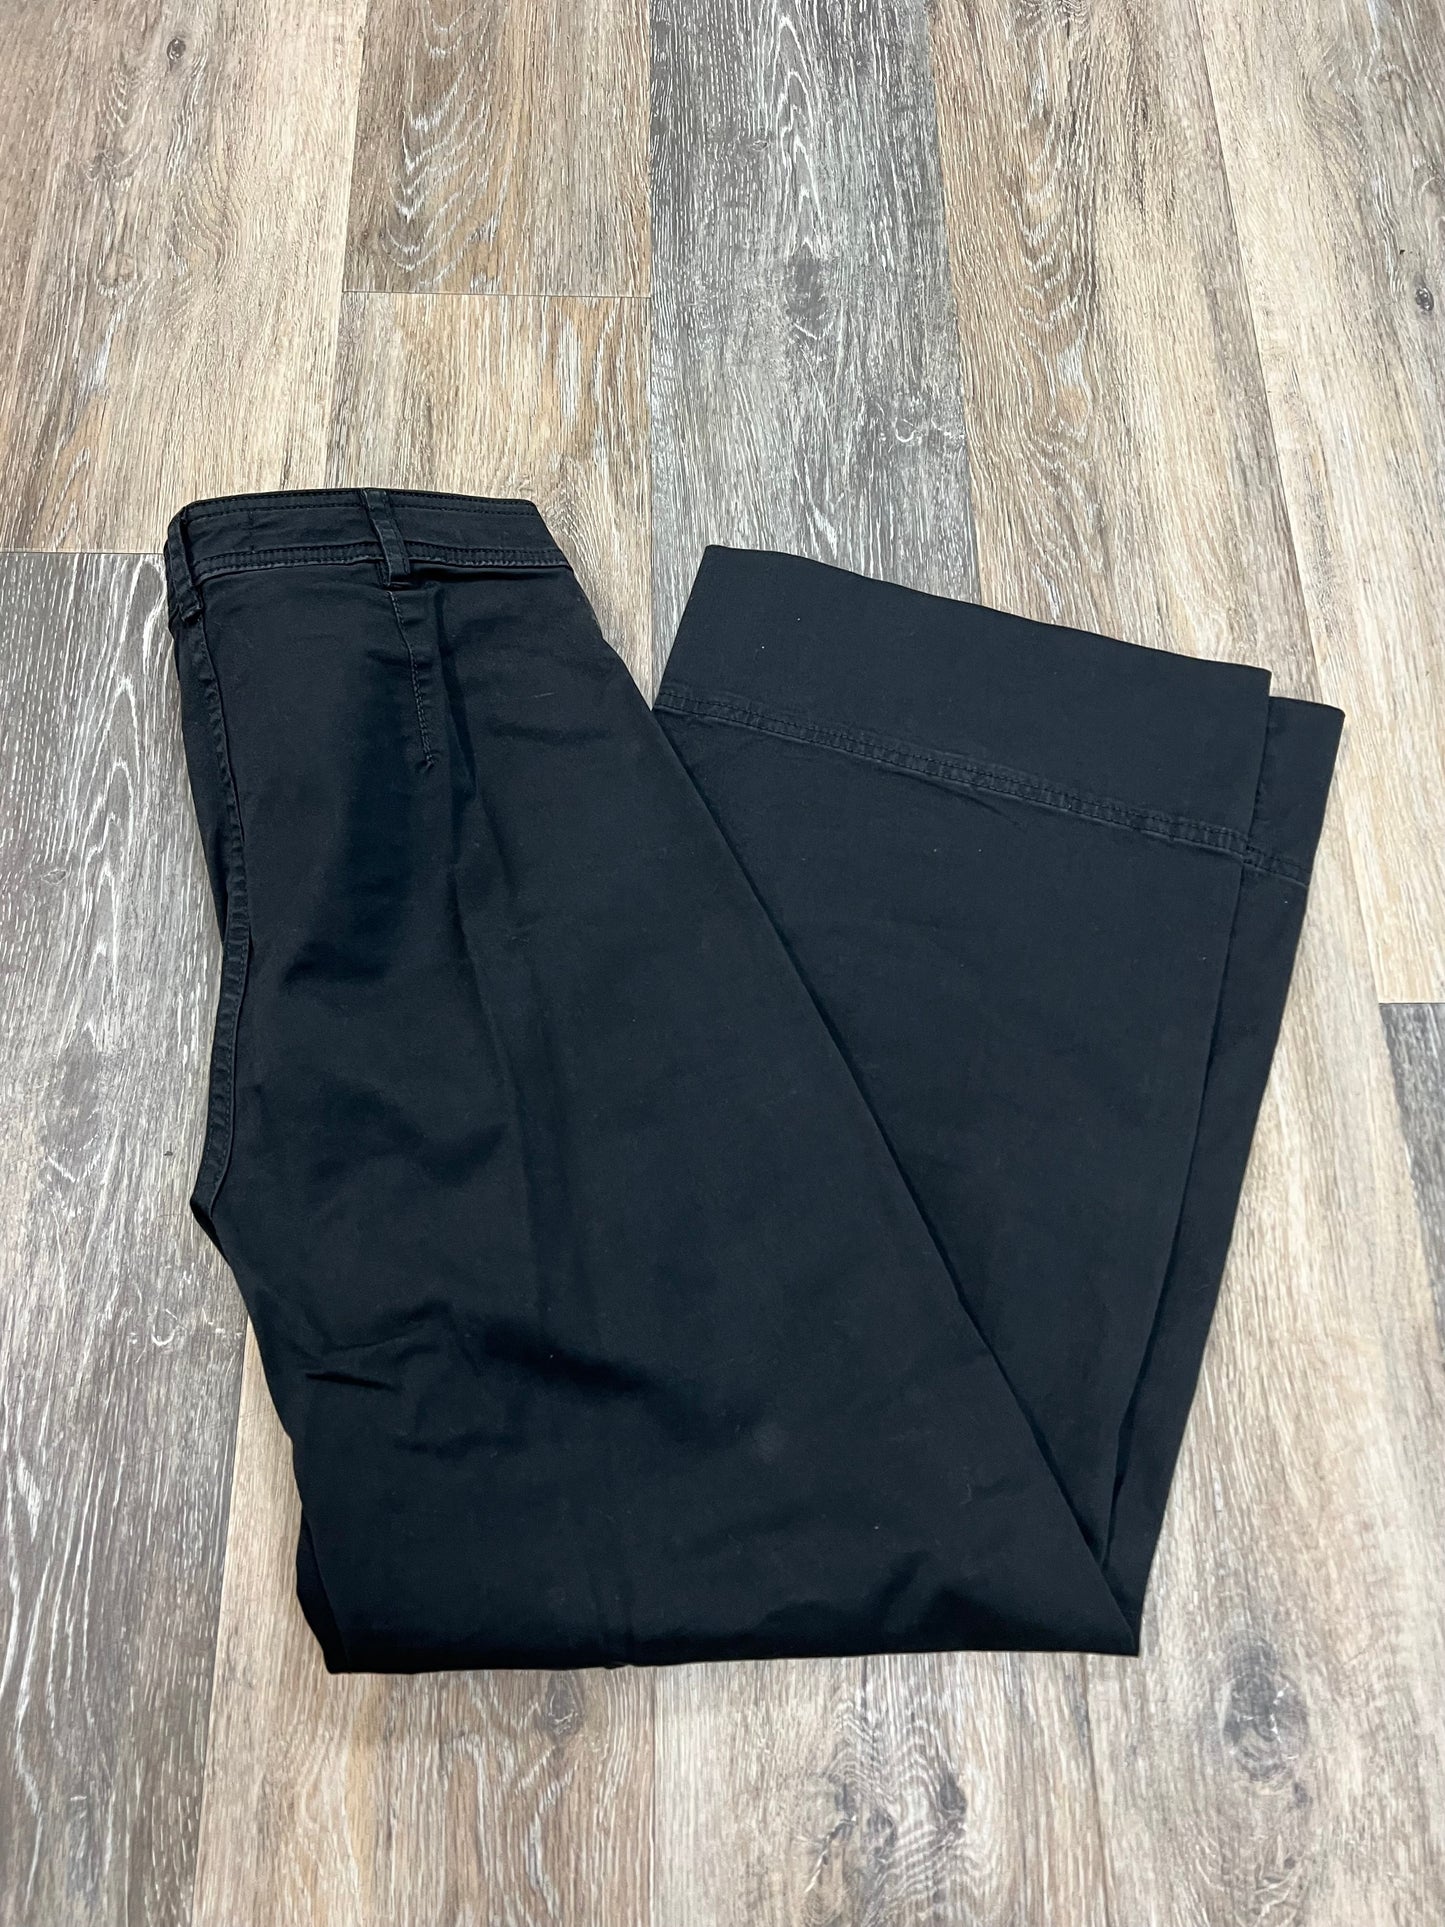 Pants Wide Leg Crop Chino By Everlane  Size: 2/26